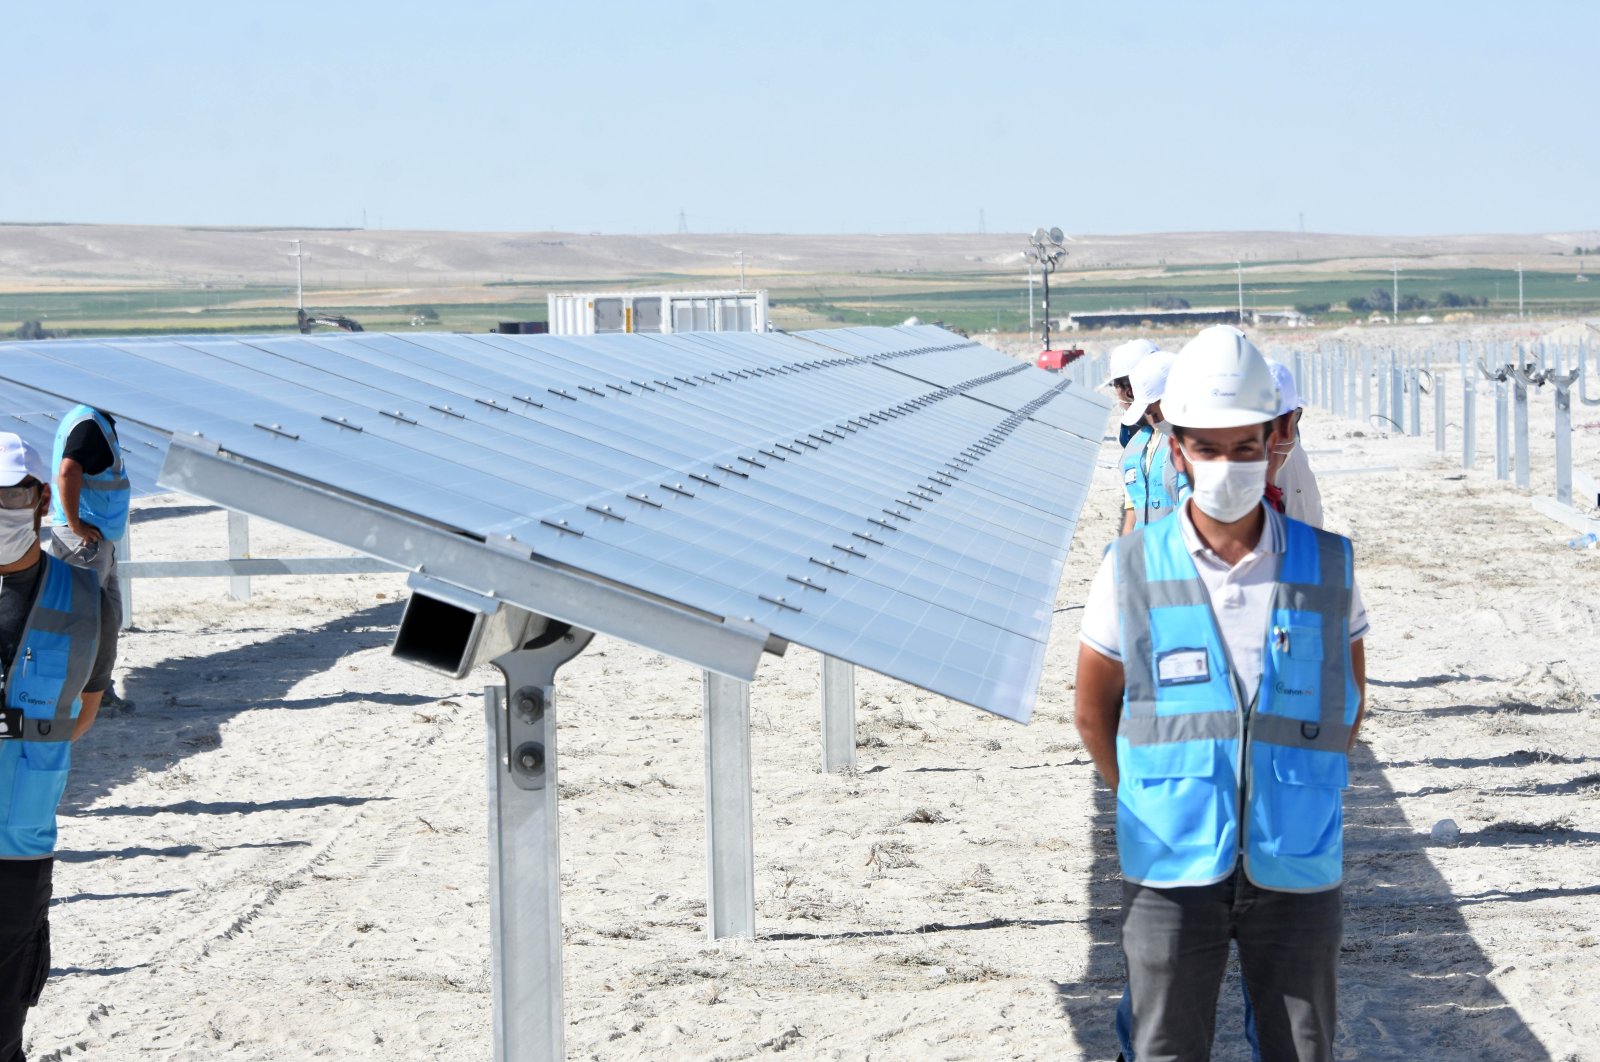 Workers stand by the solar panels in central Turkey's Karapınar SSP during the inauguration ceremony on Aug. 19, 2020. (DHA Photo)